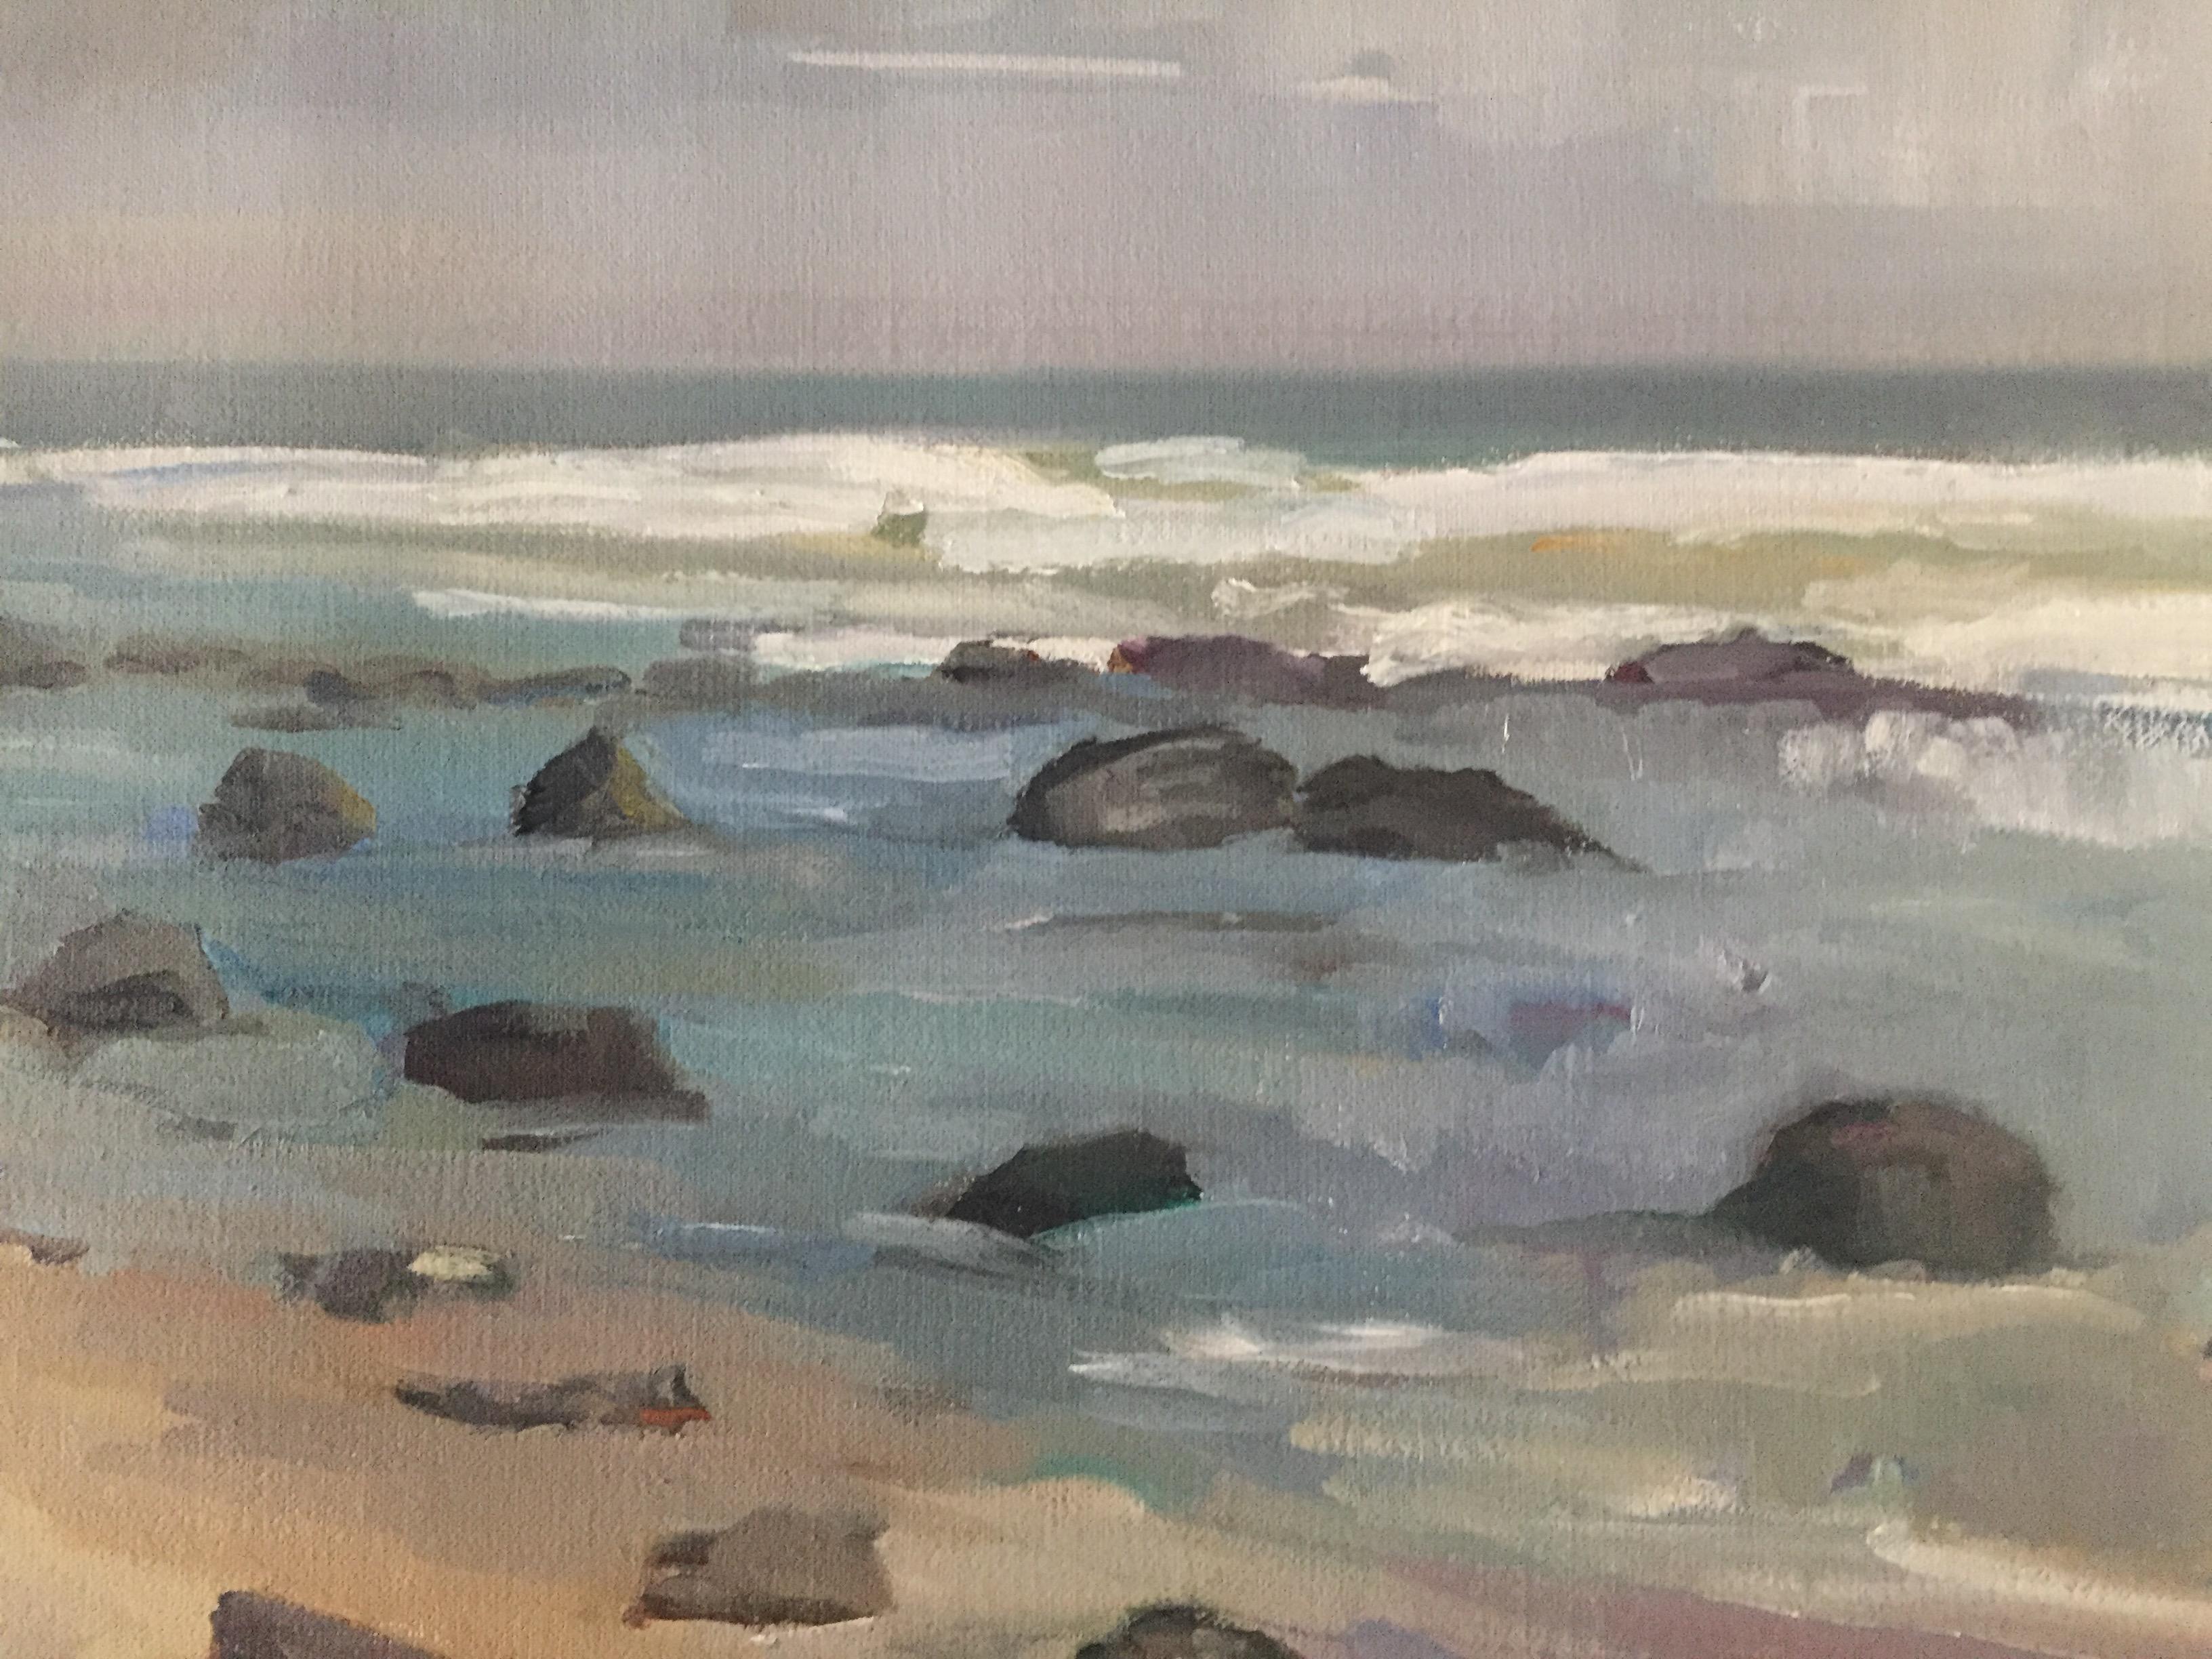 An oil painting of a rocky shoreline in Montauk, New York. Painted from life, on site. 

Framed dimensions: 22 x 31.75 inches

Maryann Lucas lives and works in Sag Harbor. She is primarily self-taught but has also received instruction and support